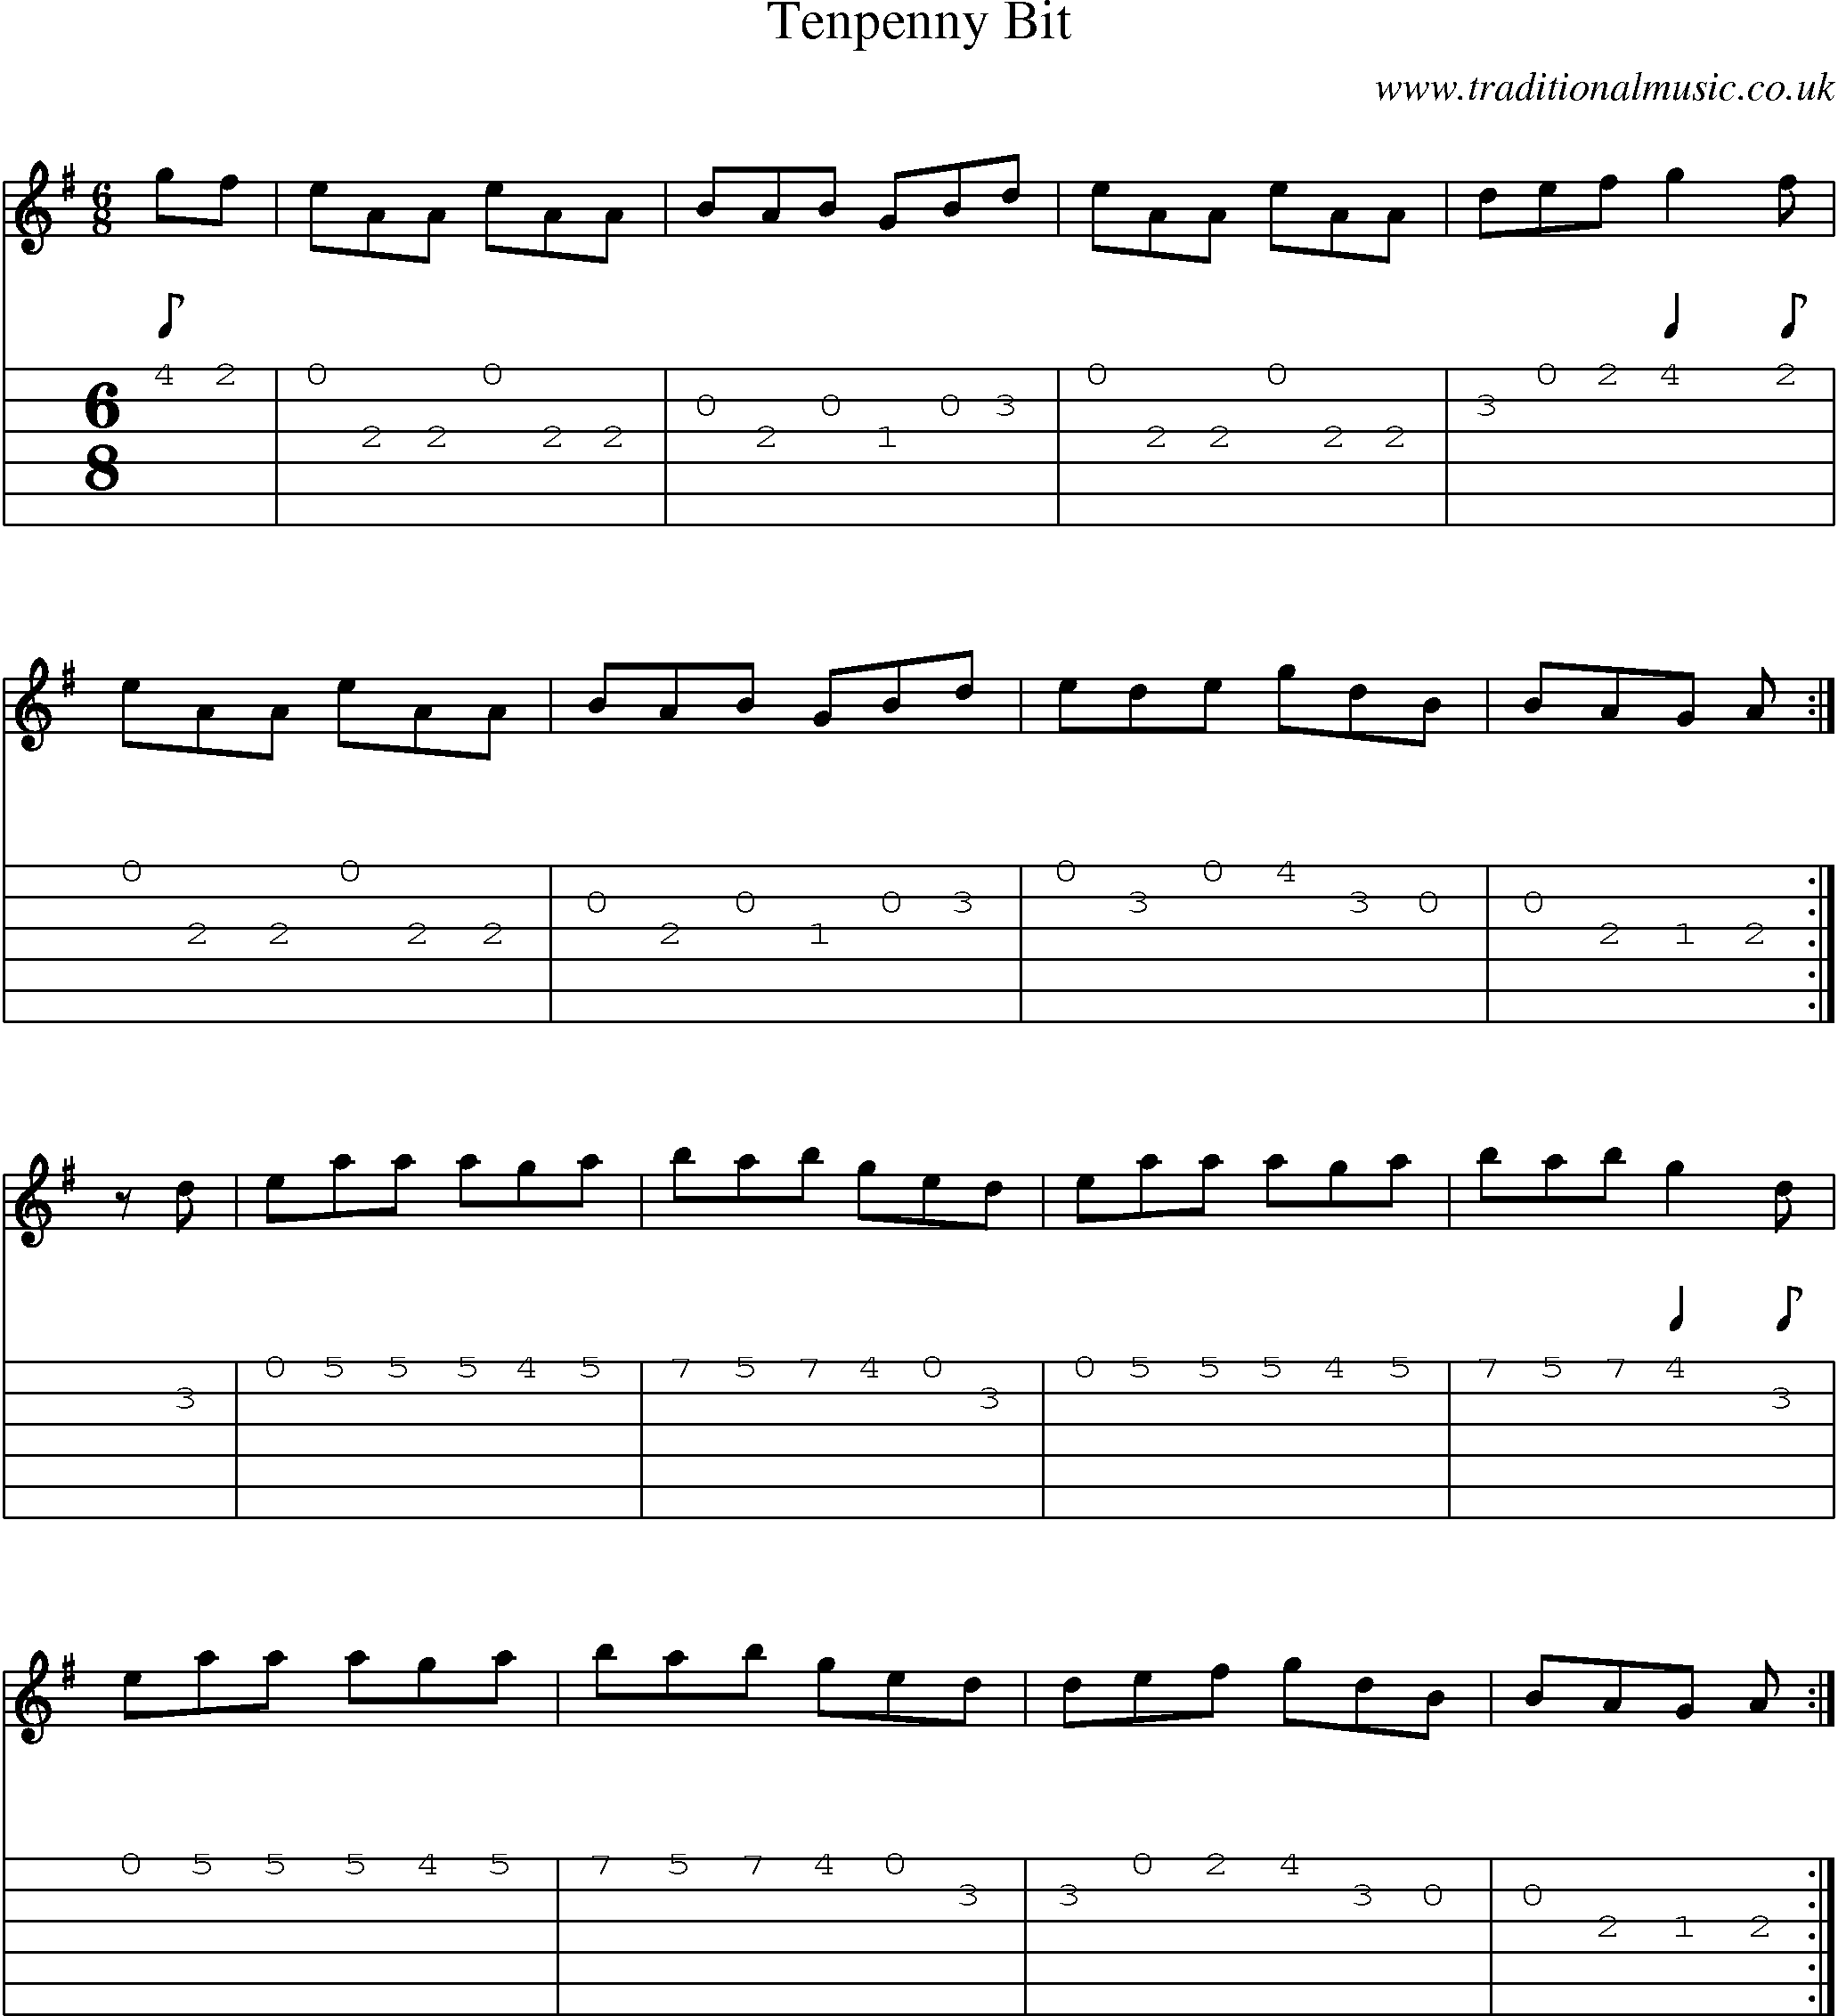 Music Score and Guitar Tabs for Tenpenny Bit